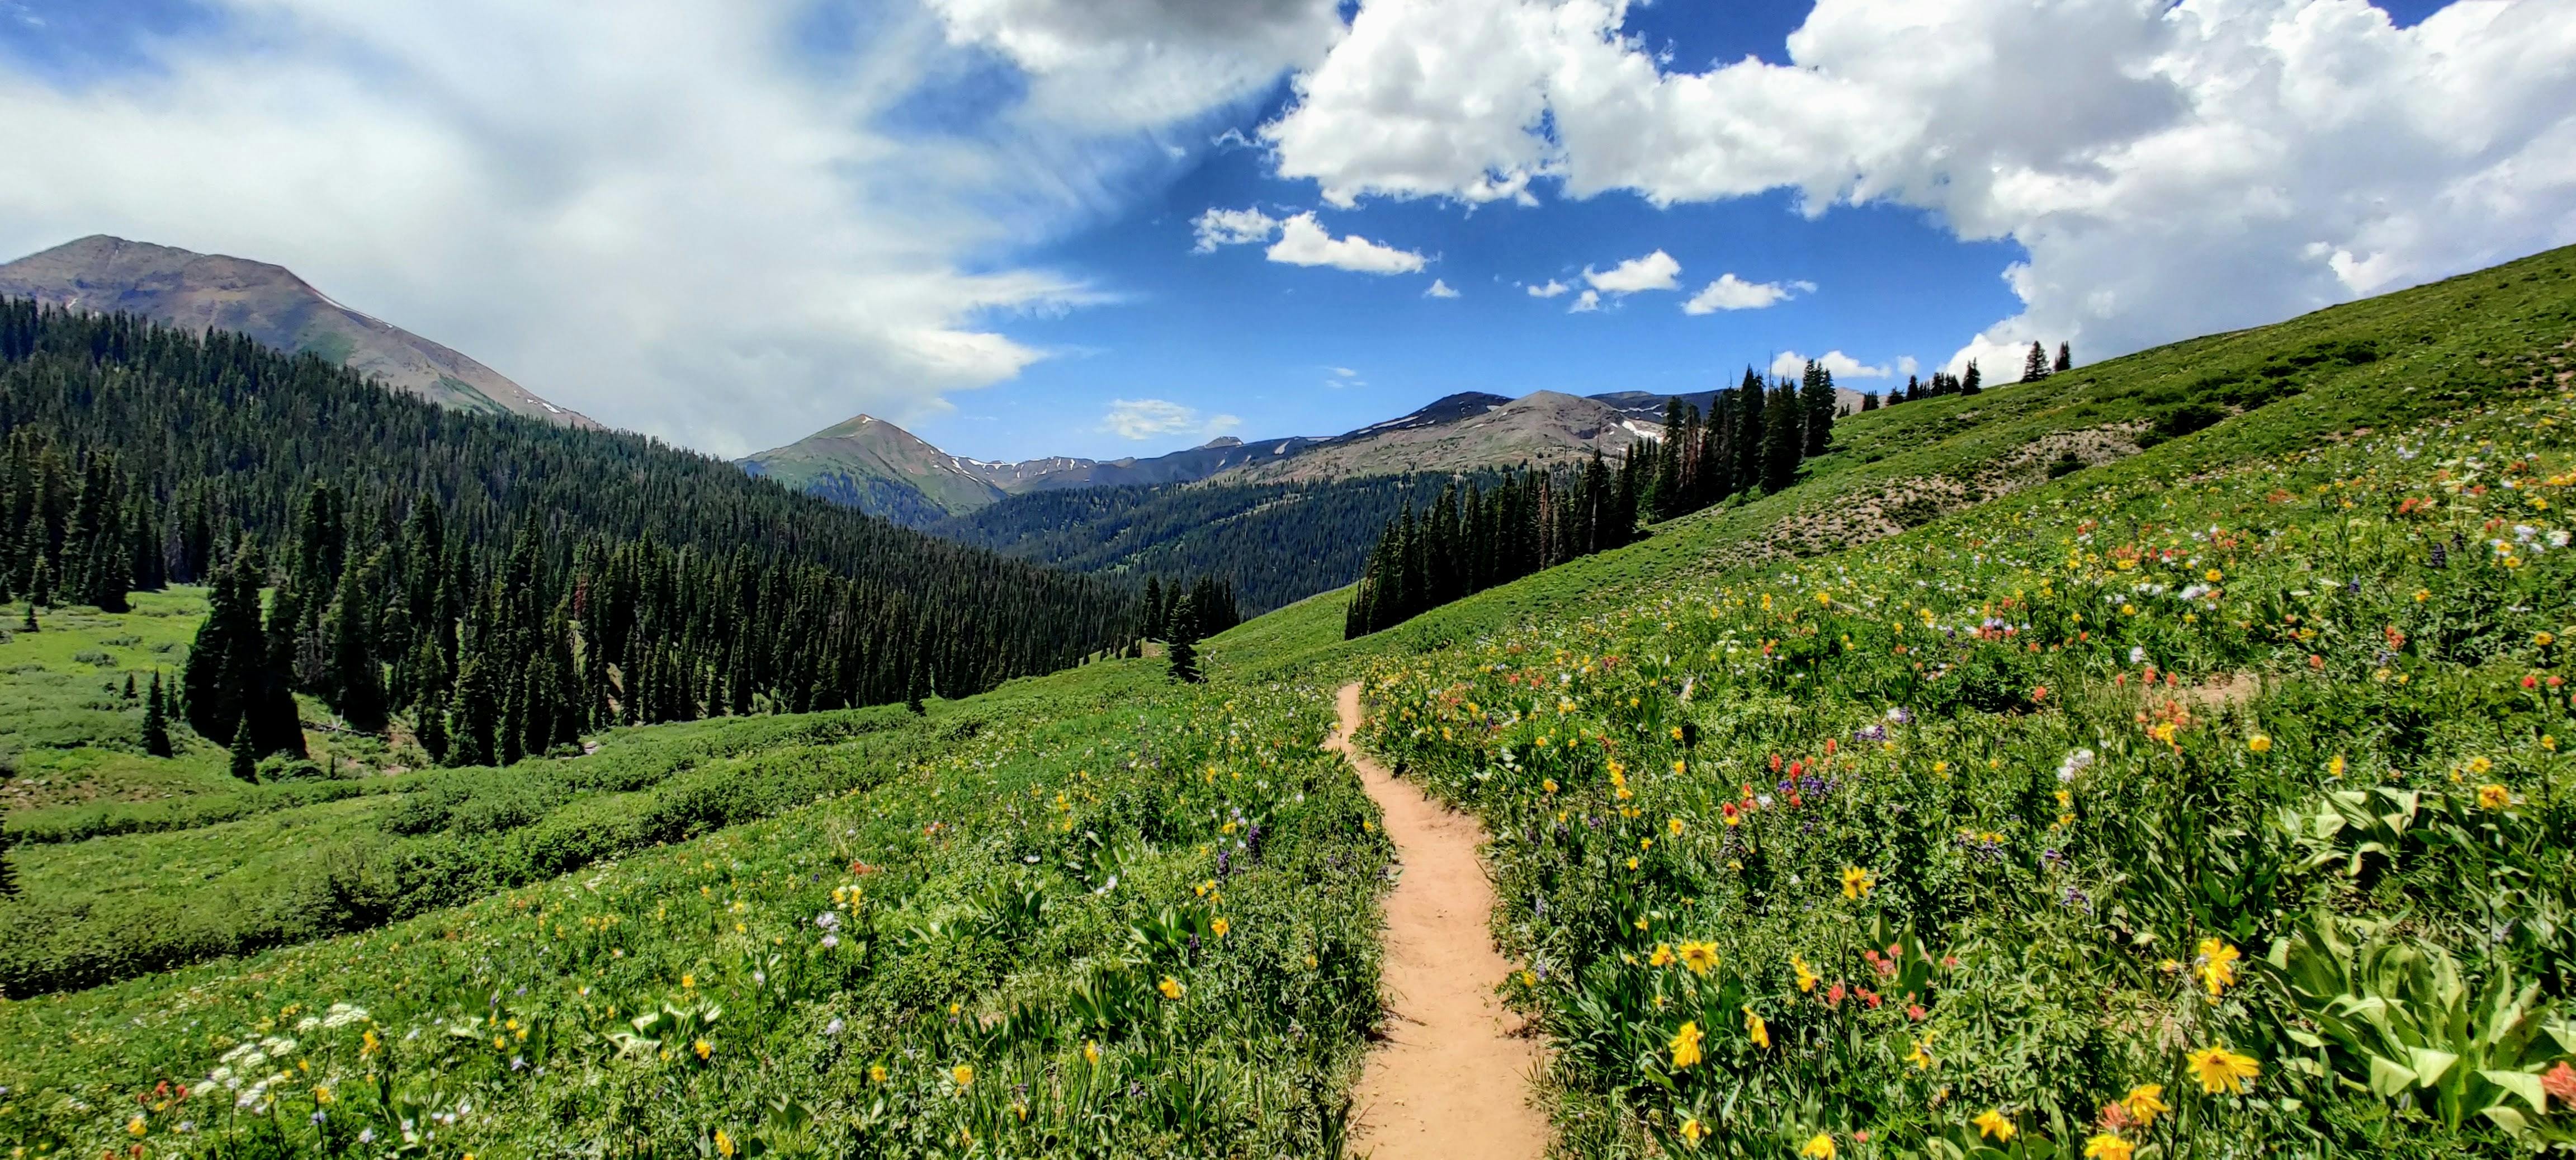 The photo is centered on a trail that goes through a gently sloped field of wildflowers with mountains in the background.